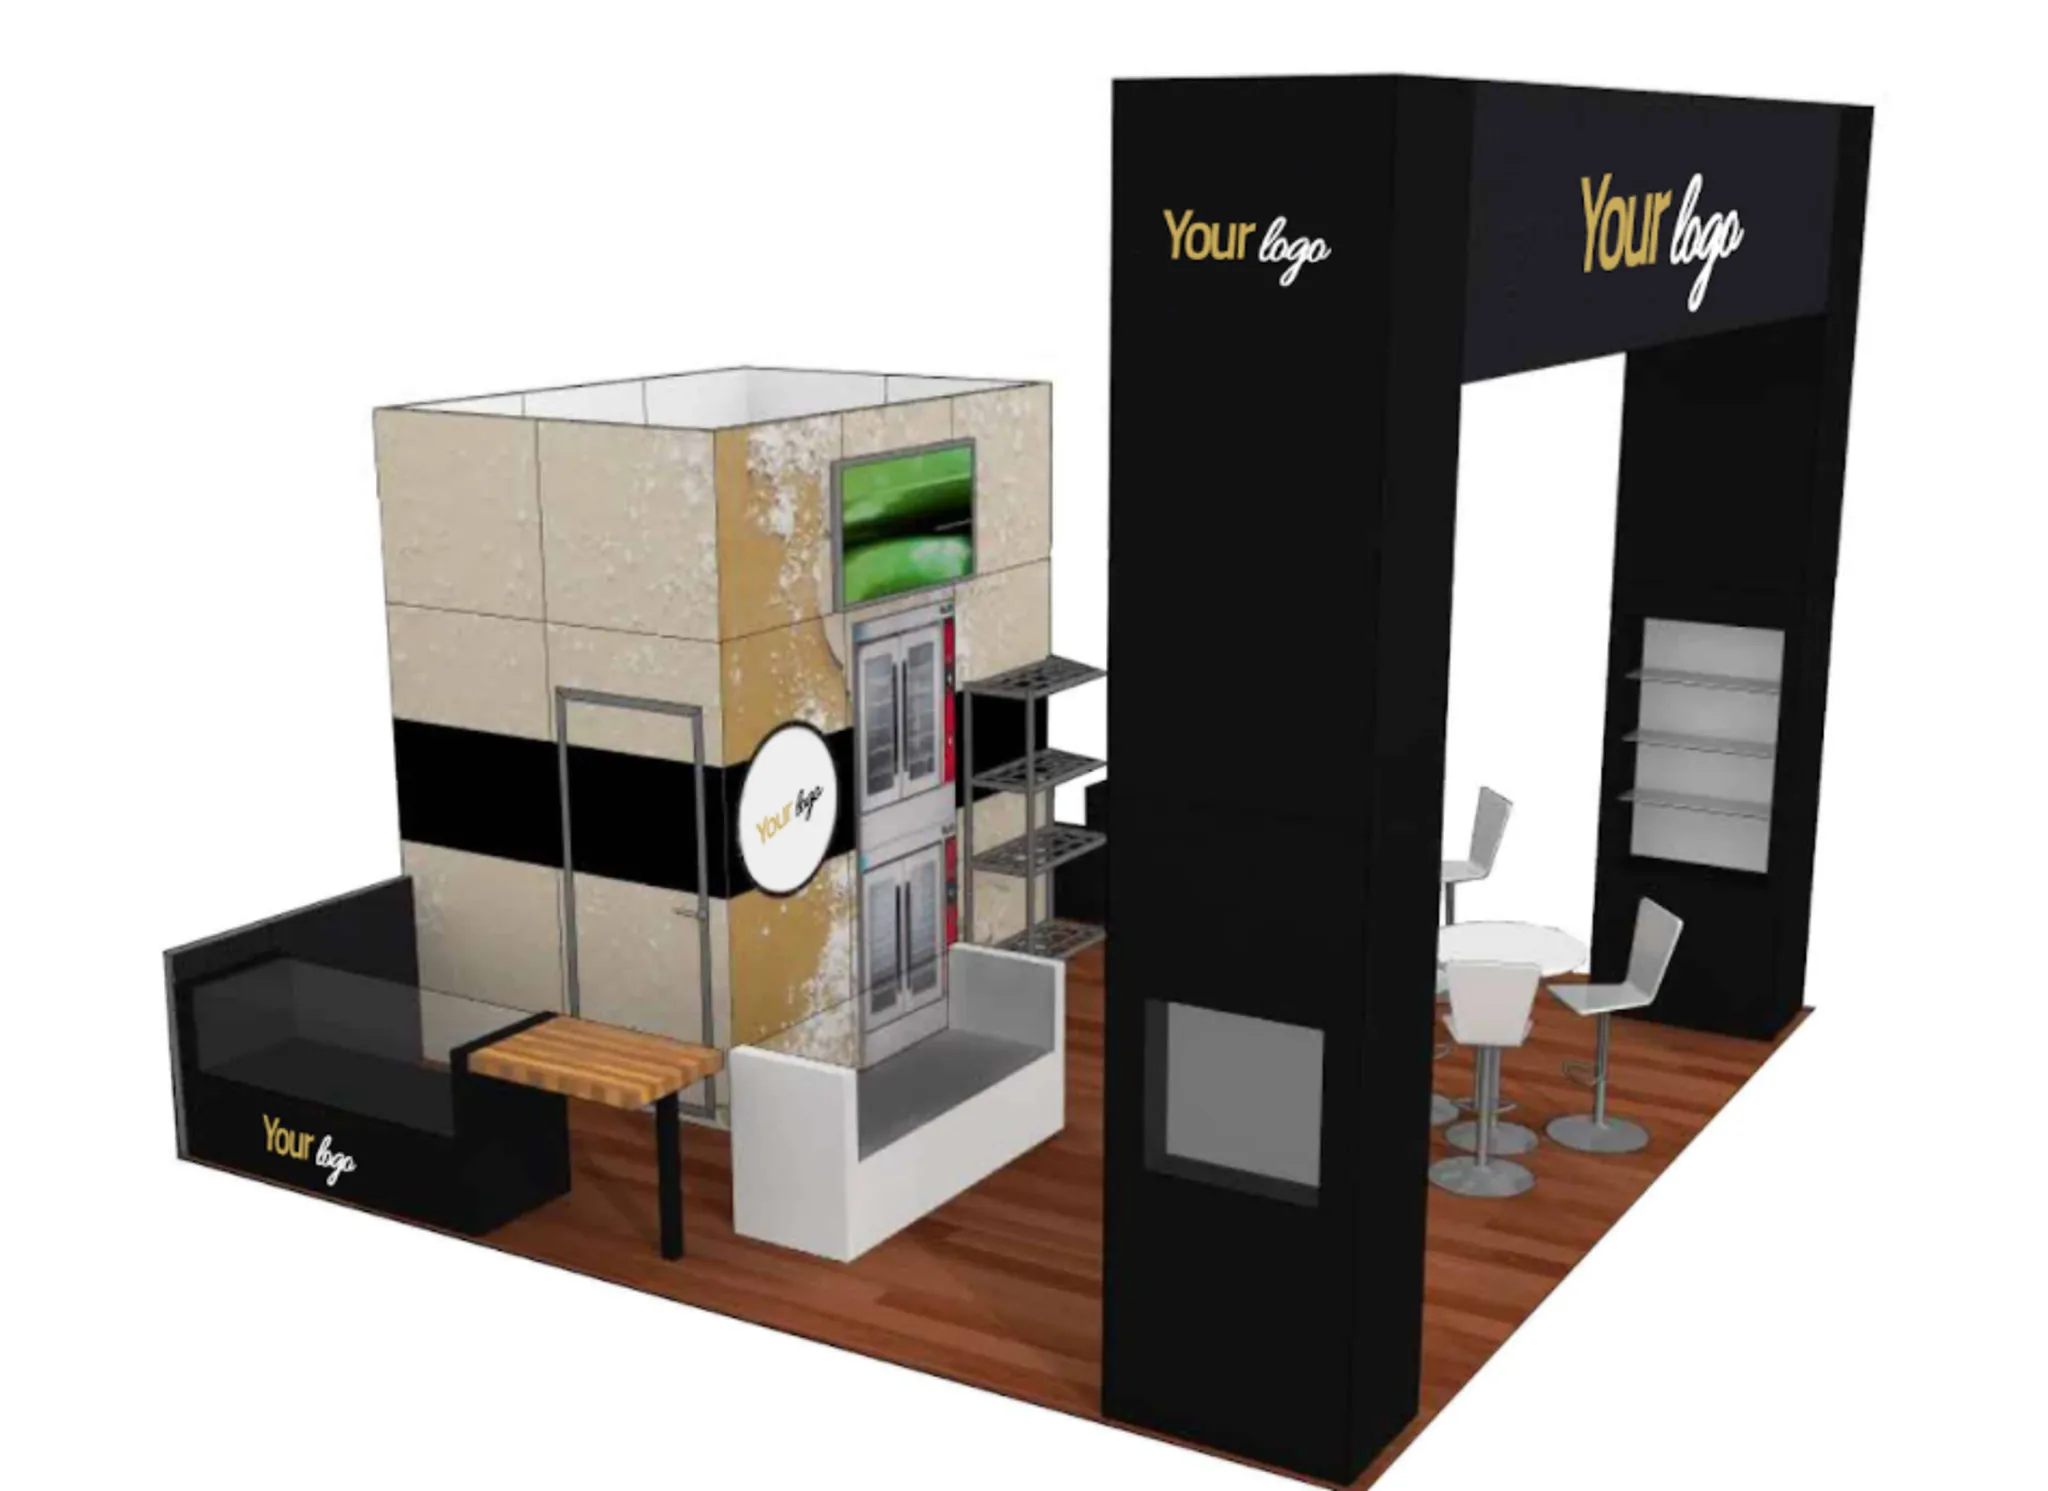 20x20 booth